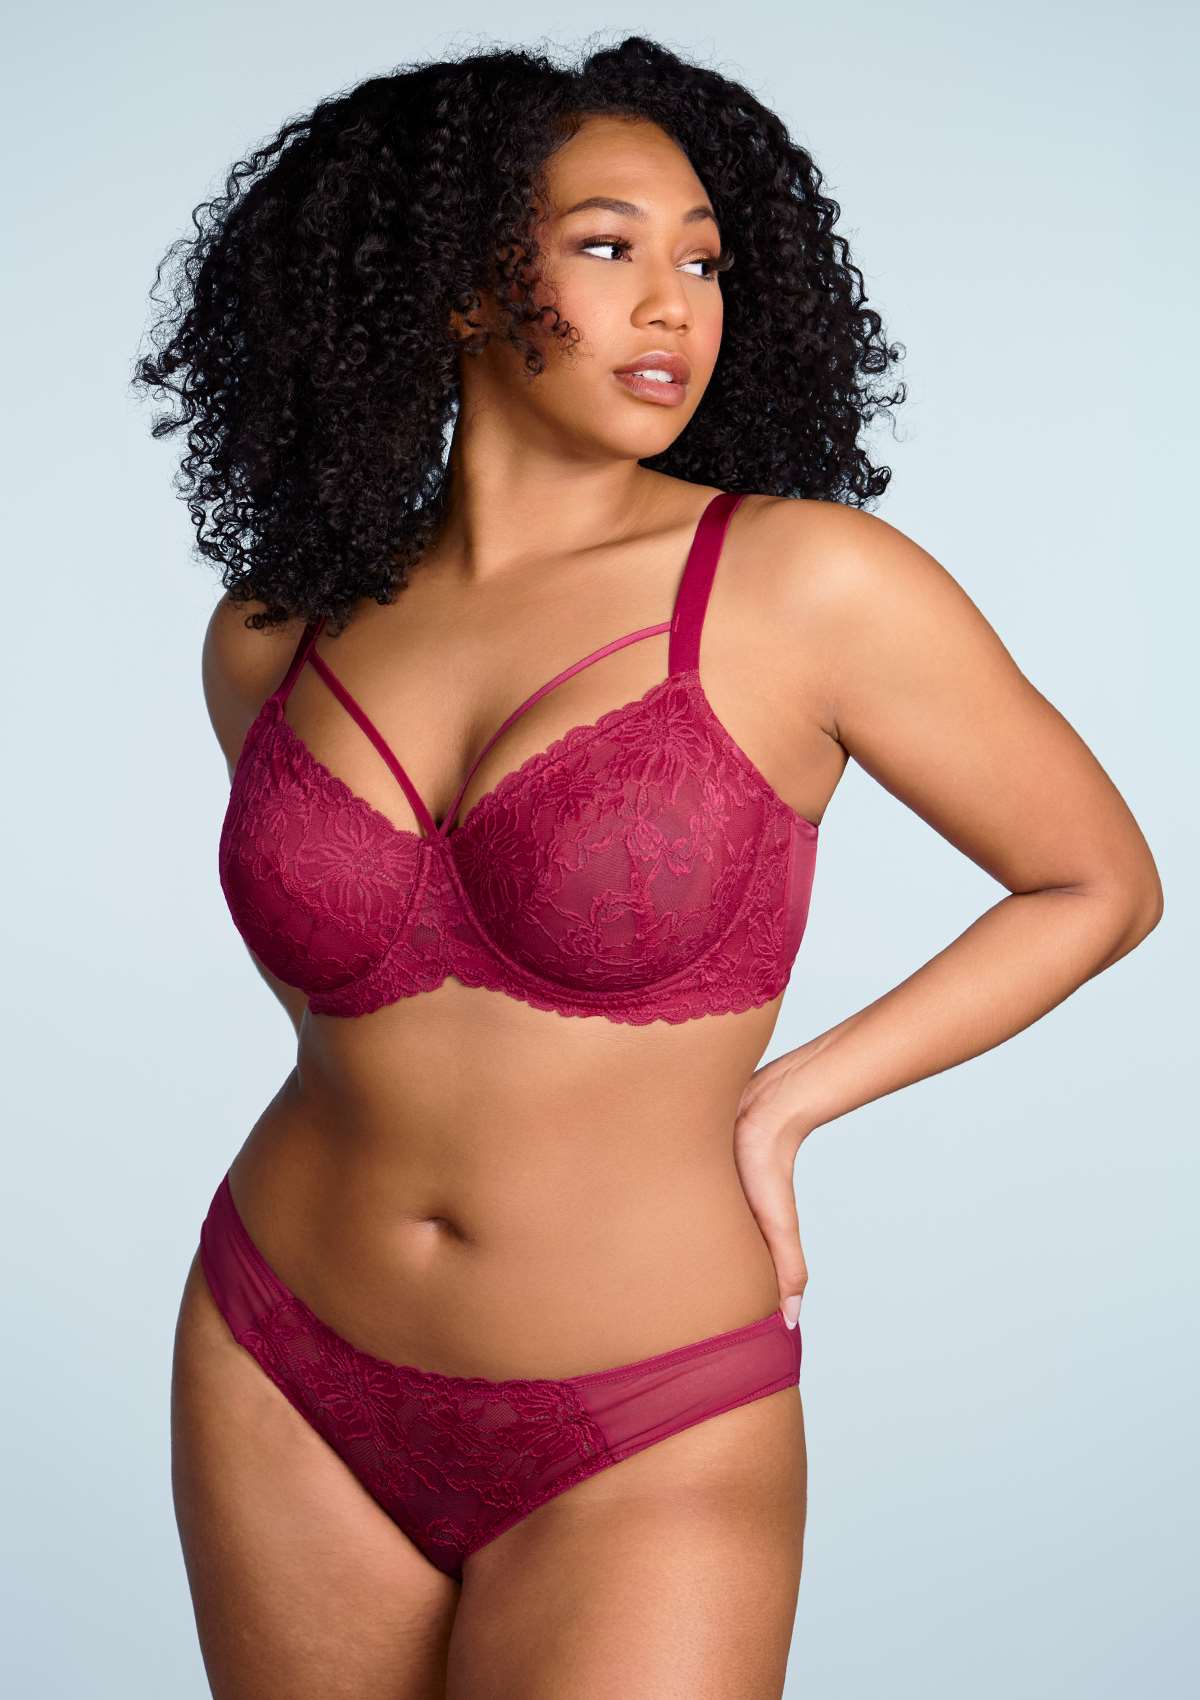 HSIA Pretty In Petals Lace Panties And Bra Set: Plus Size Women Bra - Red / 46 / DD/E